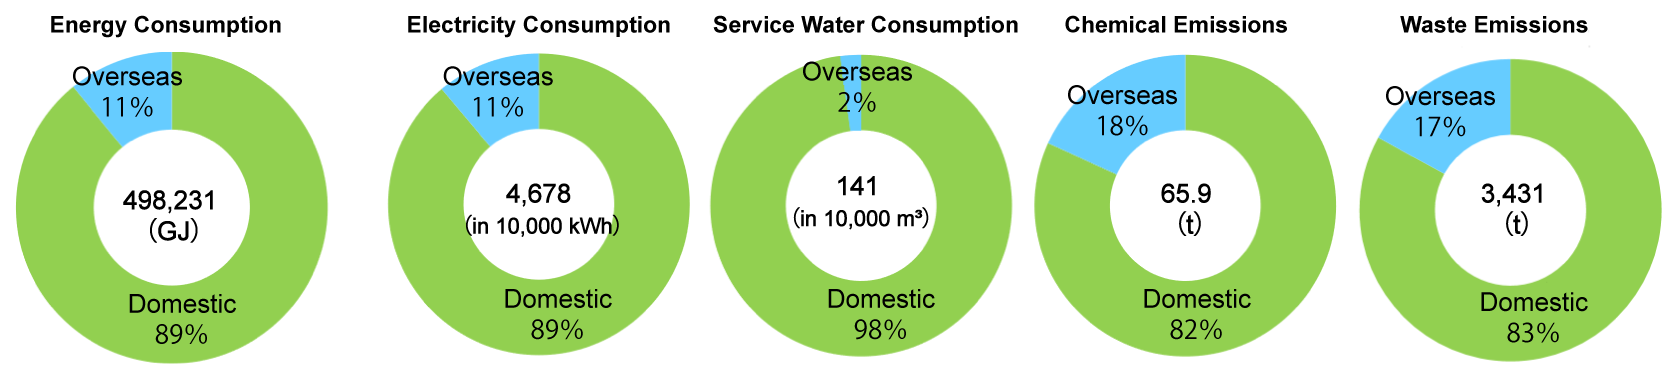 Environmental load from domestic and overseas plants